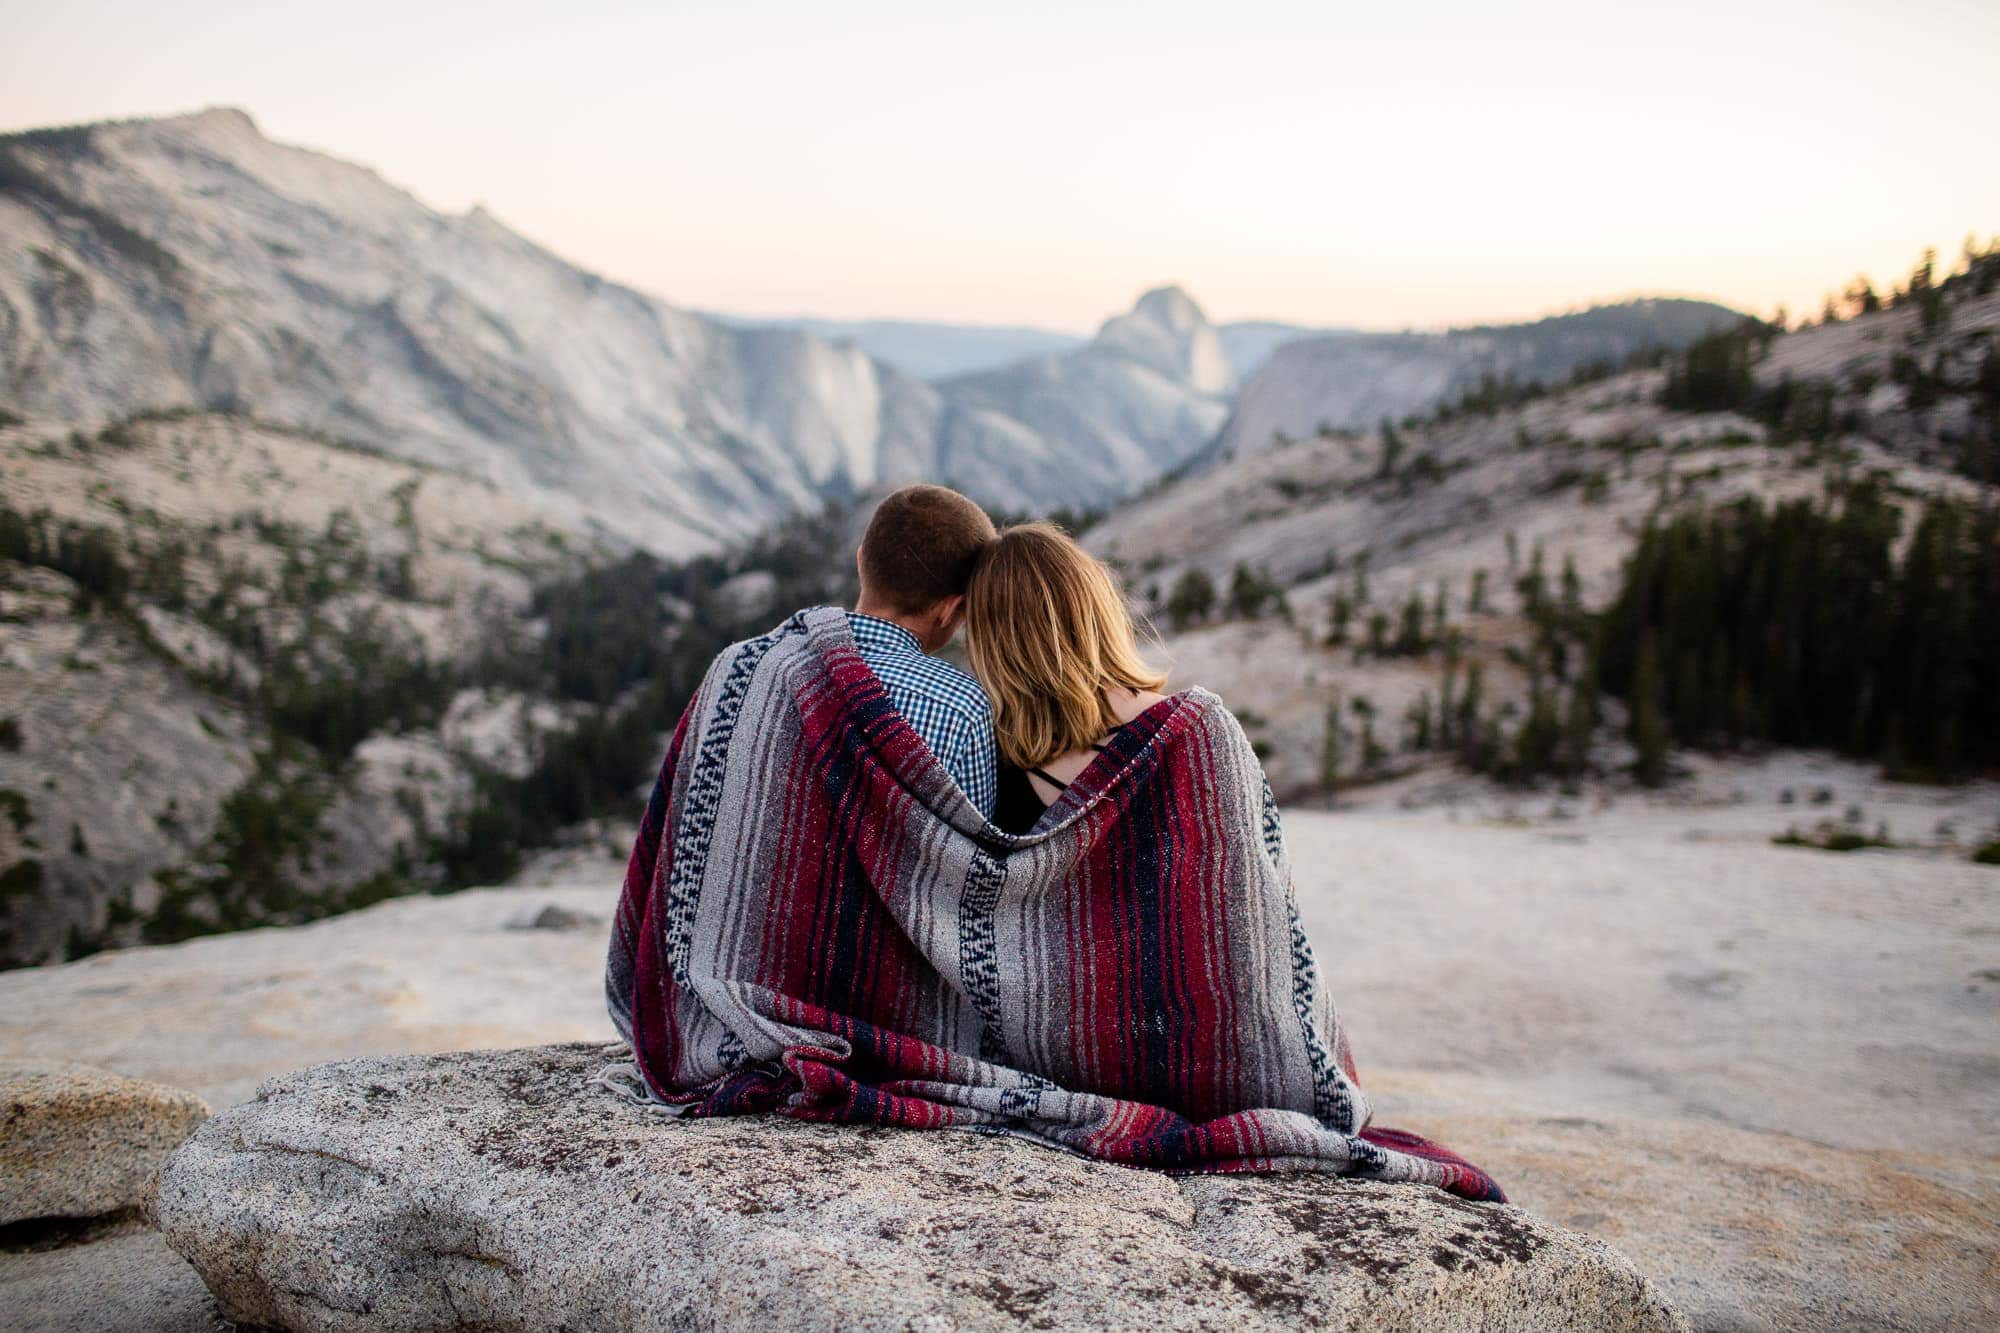 Man and woman wrapped in blanket sitting on mountain top looking at the view